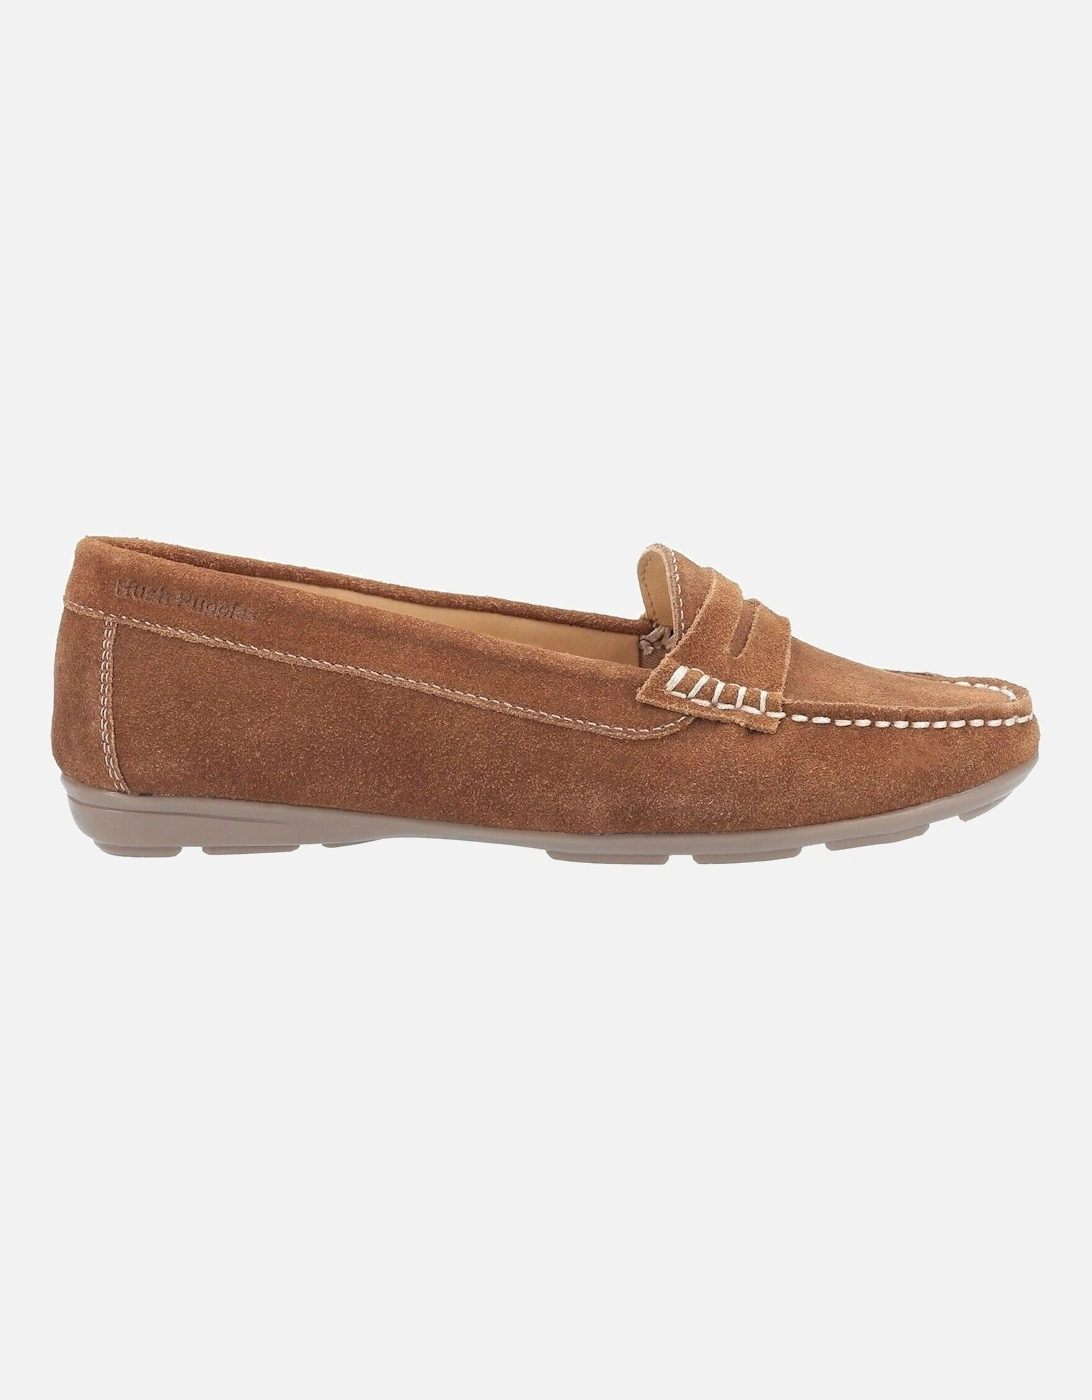 Womens/Ladies Margot Suede Leather Loafer Shoe